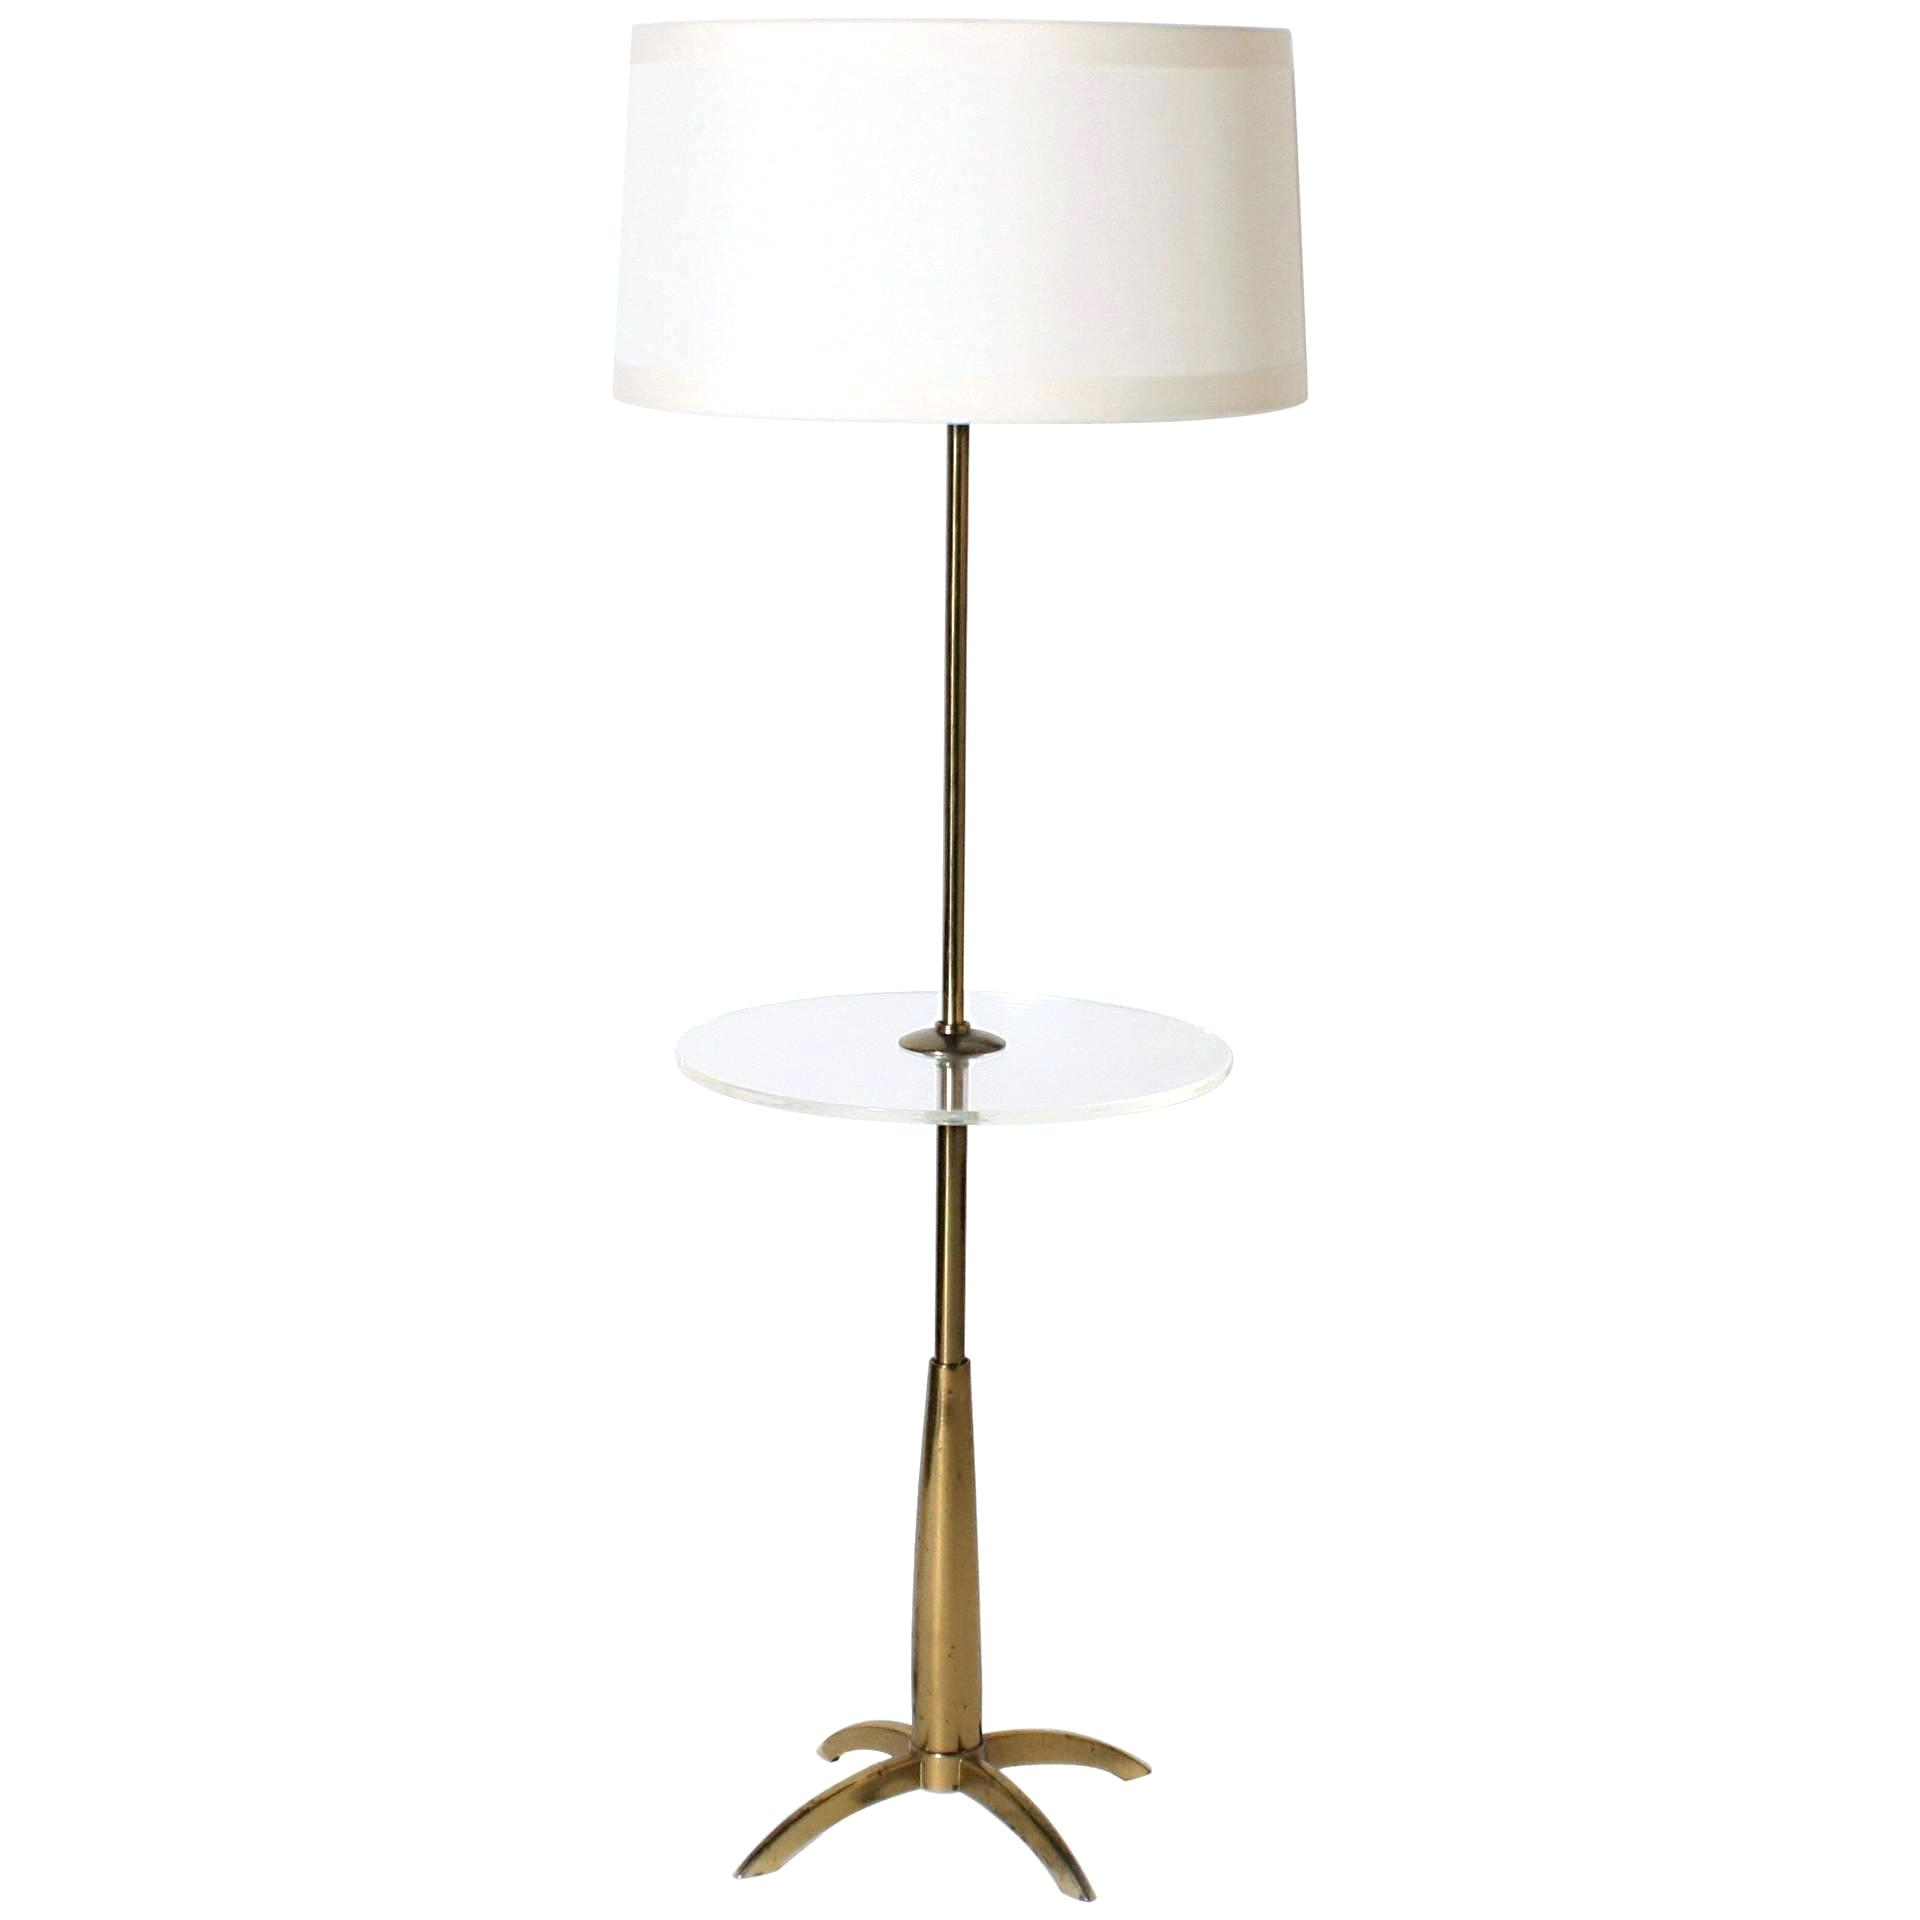 Lamps Sears Lighting Floor Lamps Lamp Shade Floor Lamp with regard to sizing 1920 X 1920